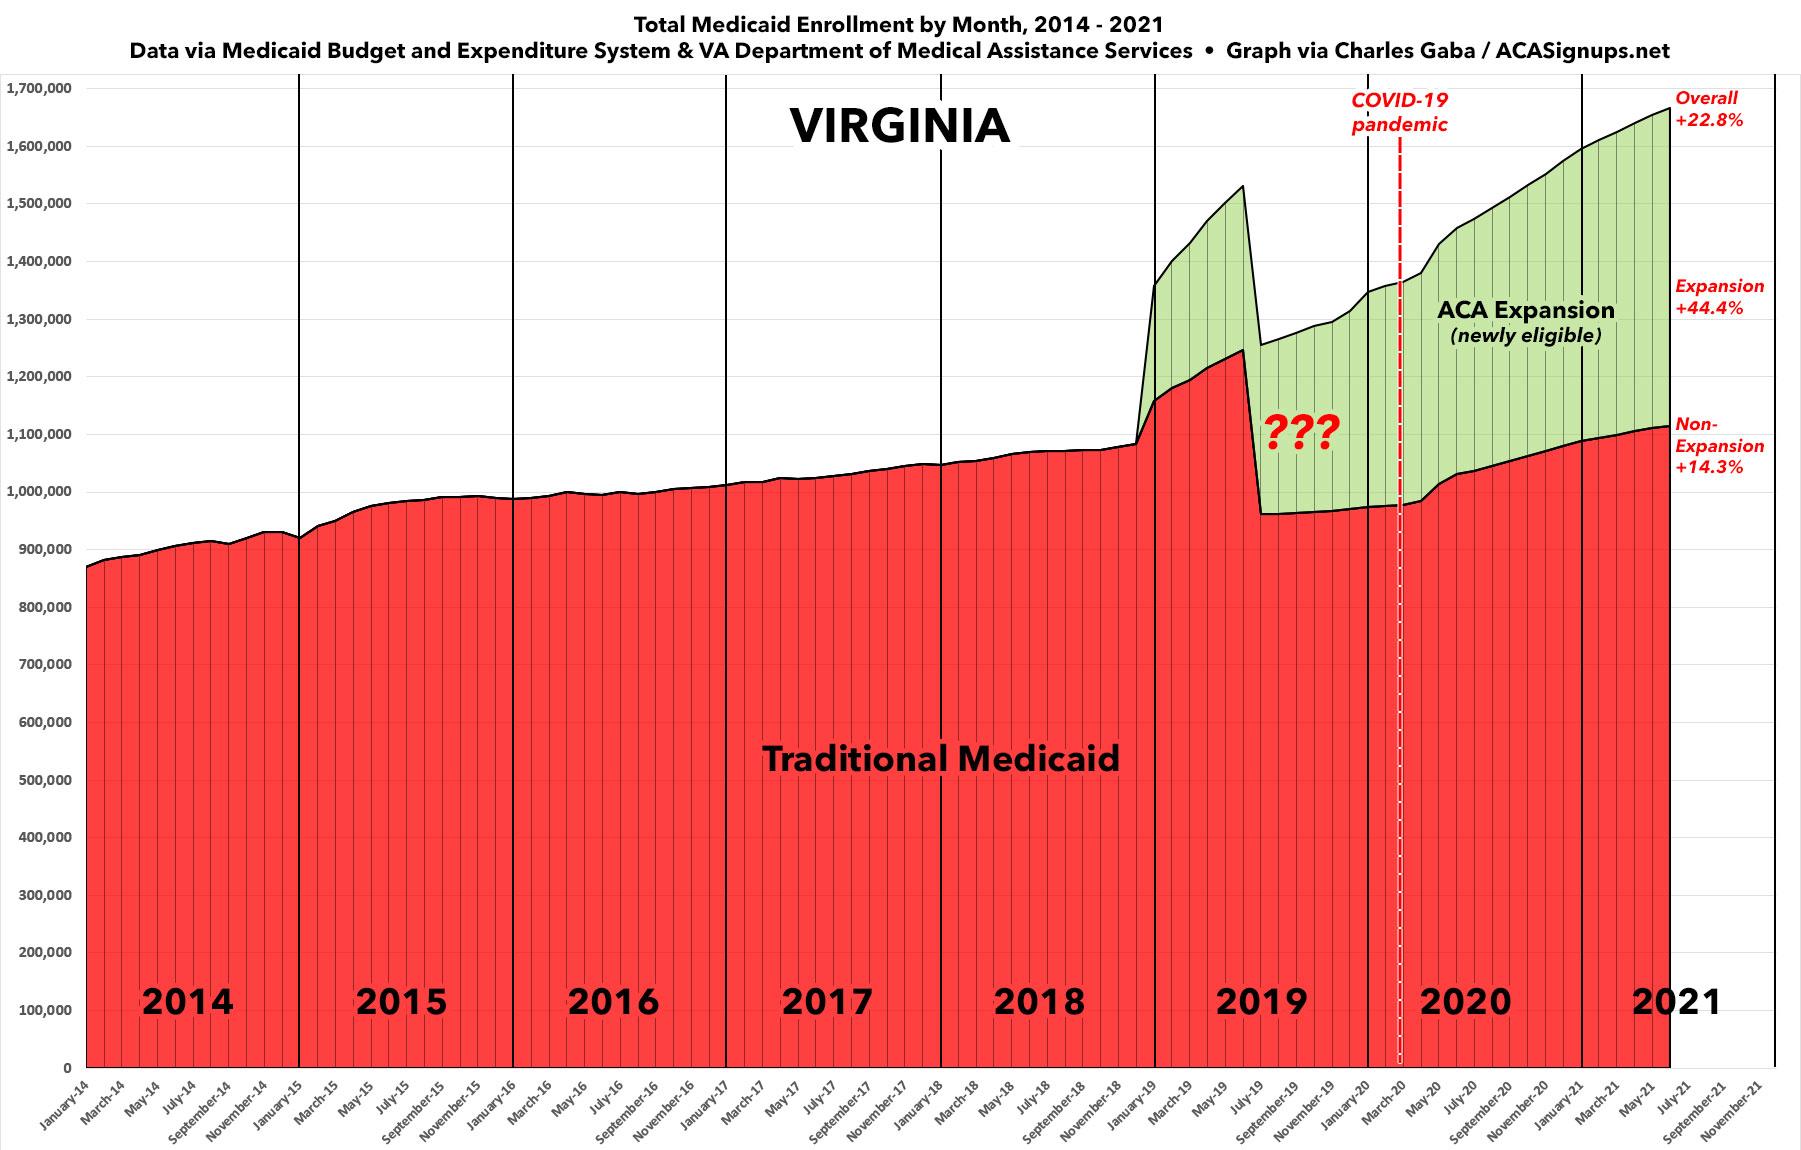 Virginia Medicaid expansion enrollment up 44 since COVID hit; total